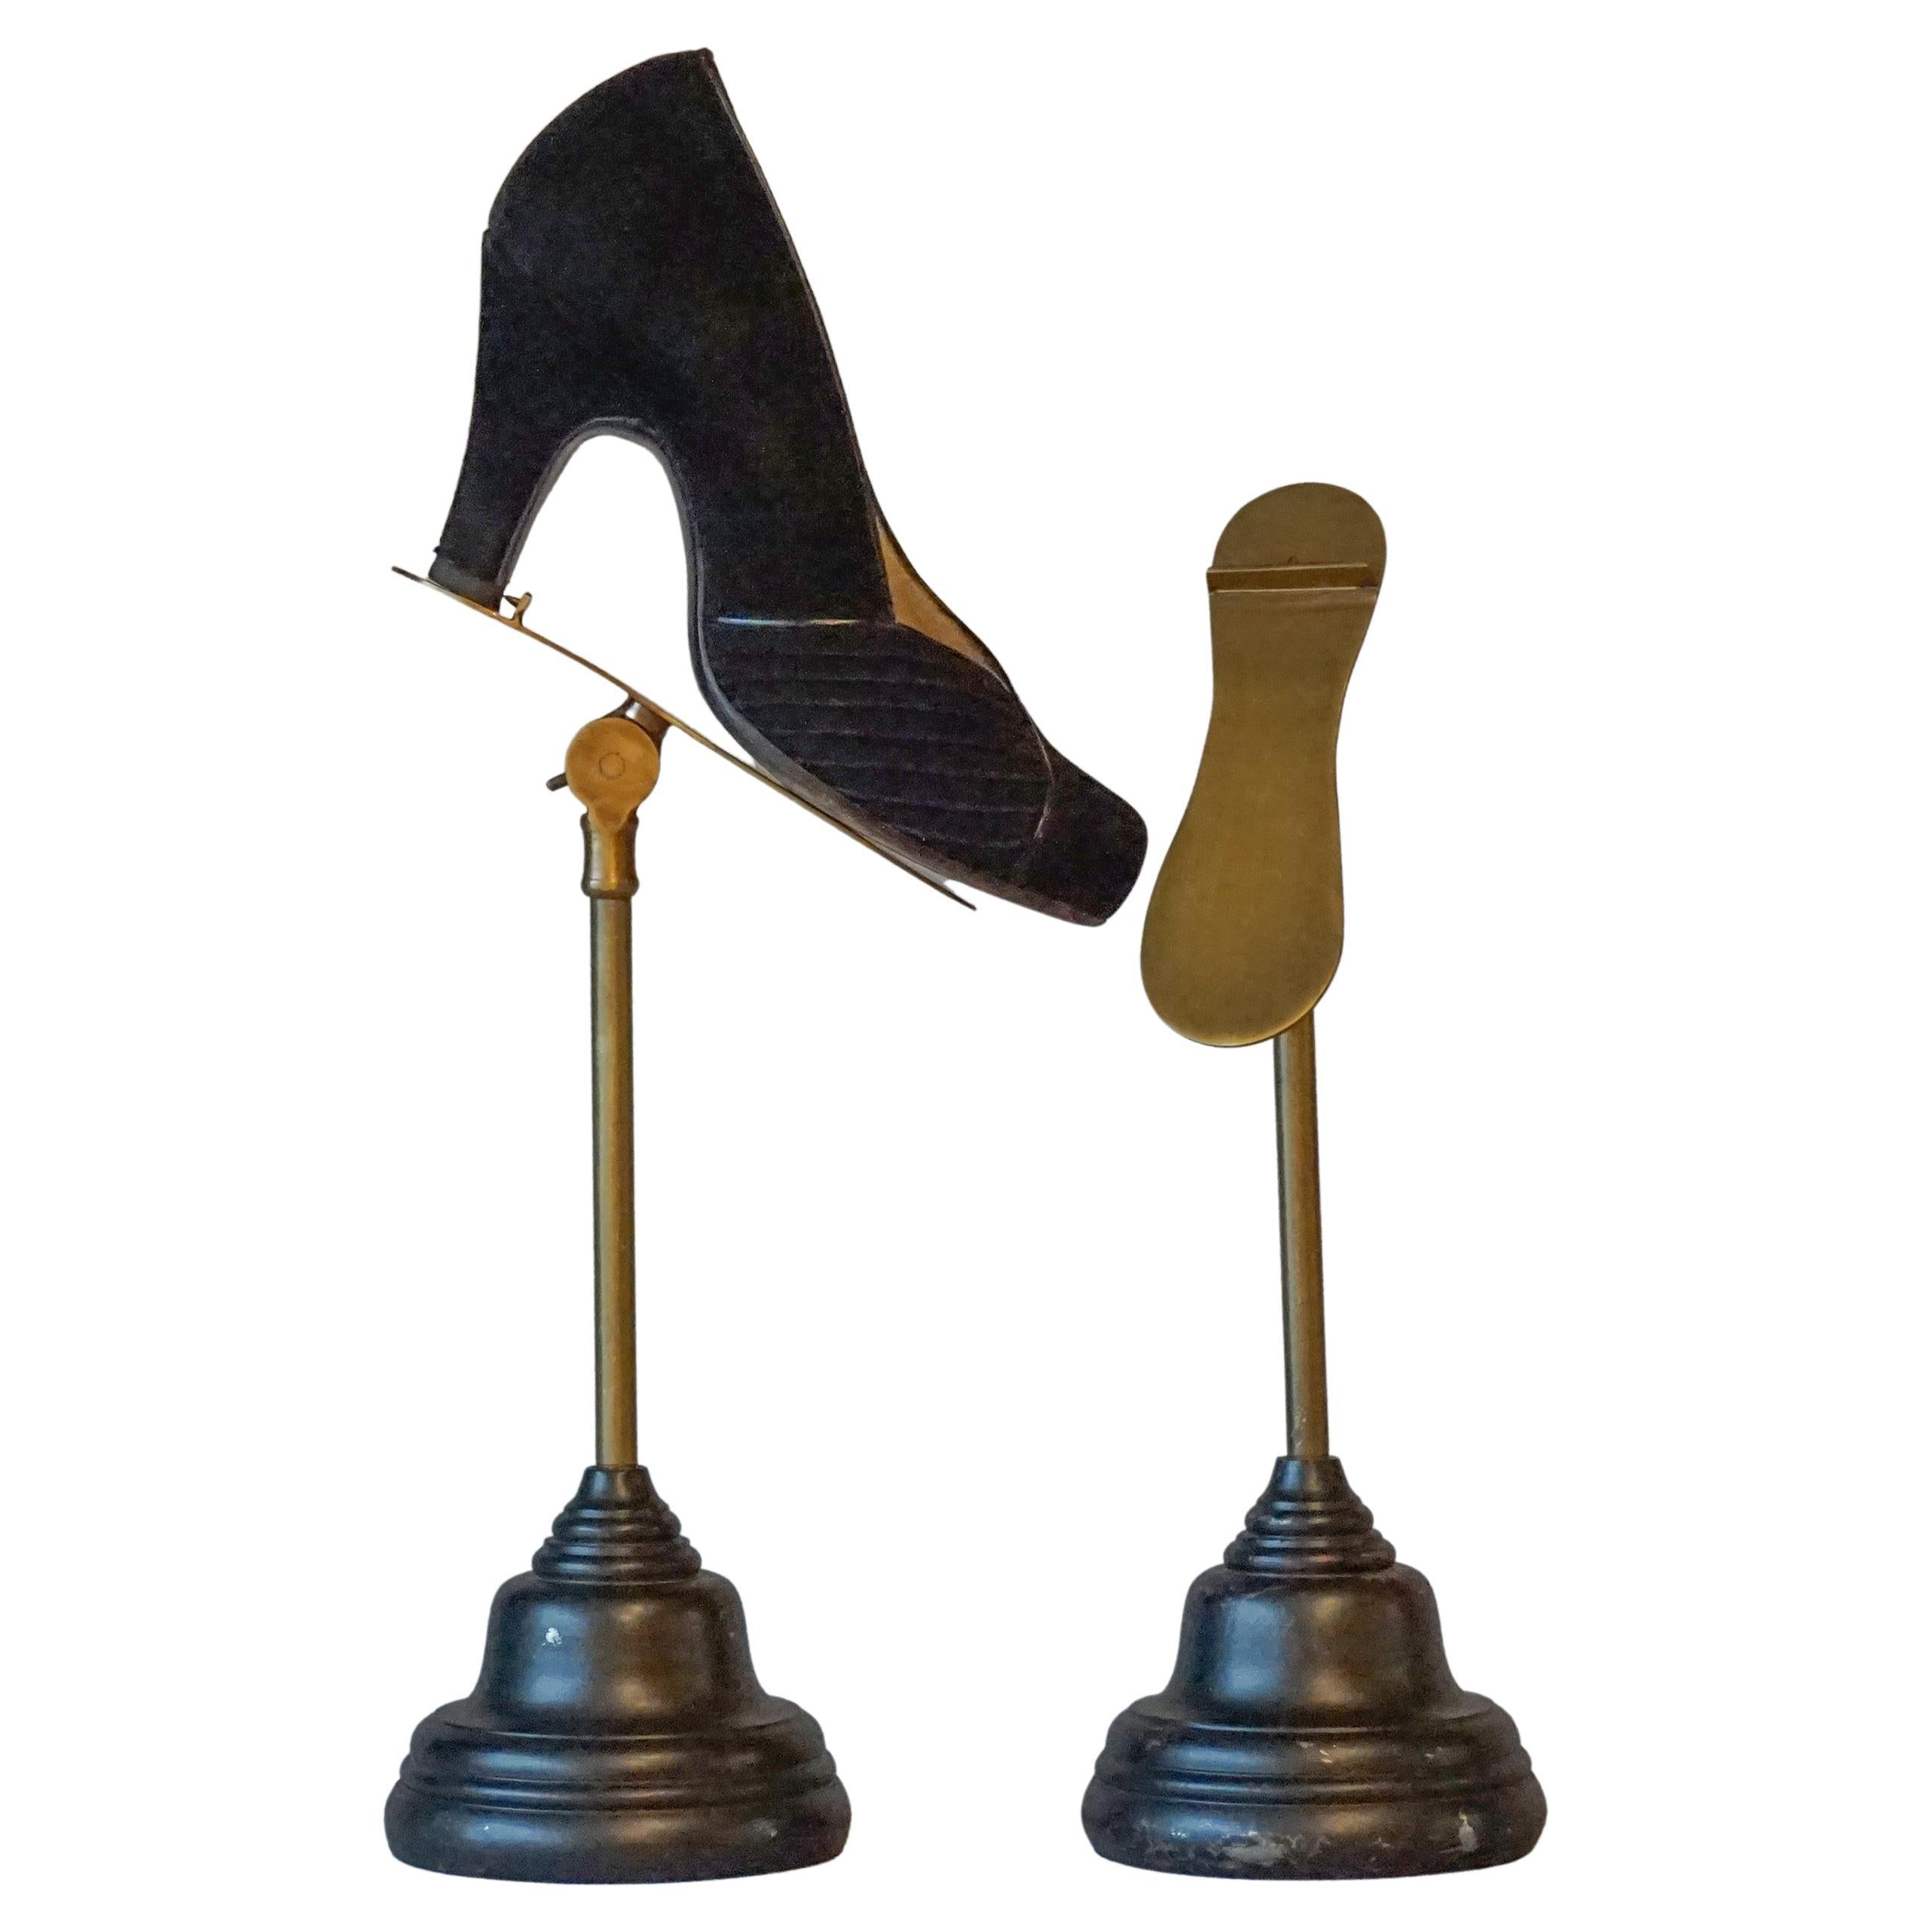 19th C. Victorian English Department Store Brass Shoe Display Counter Stand Set